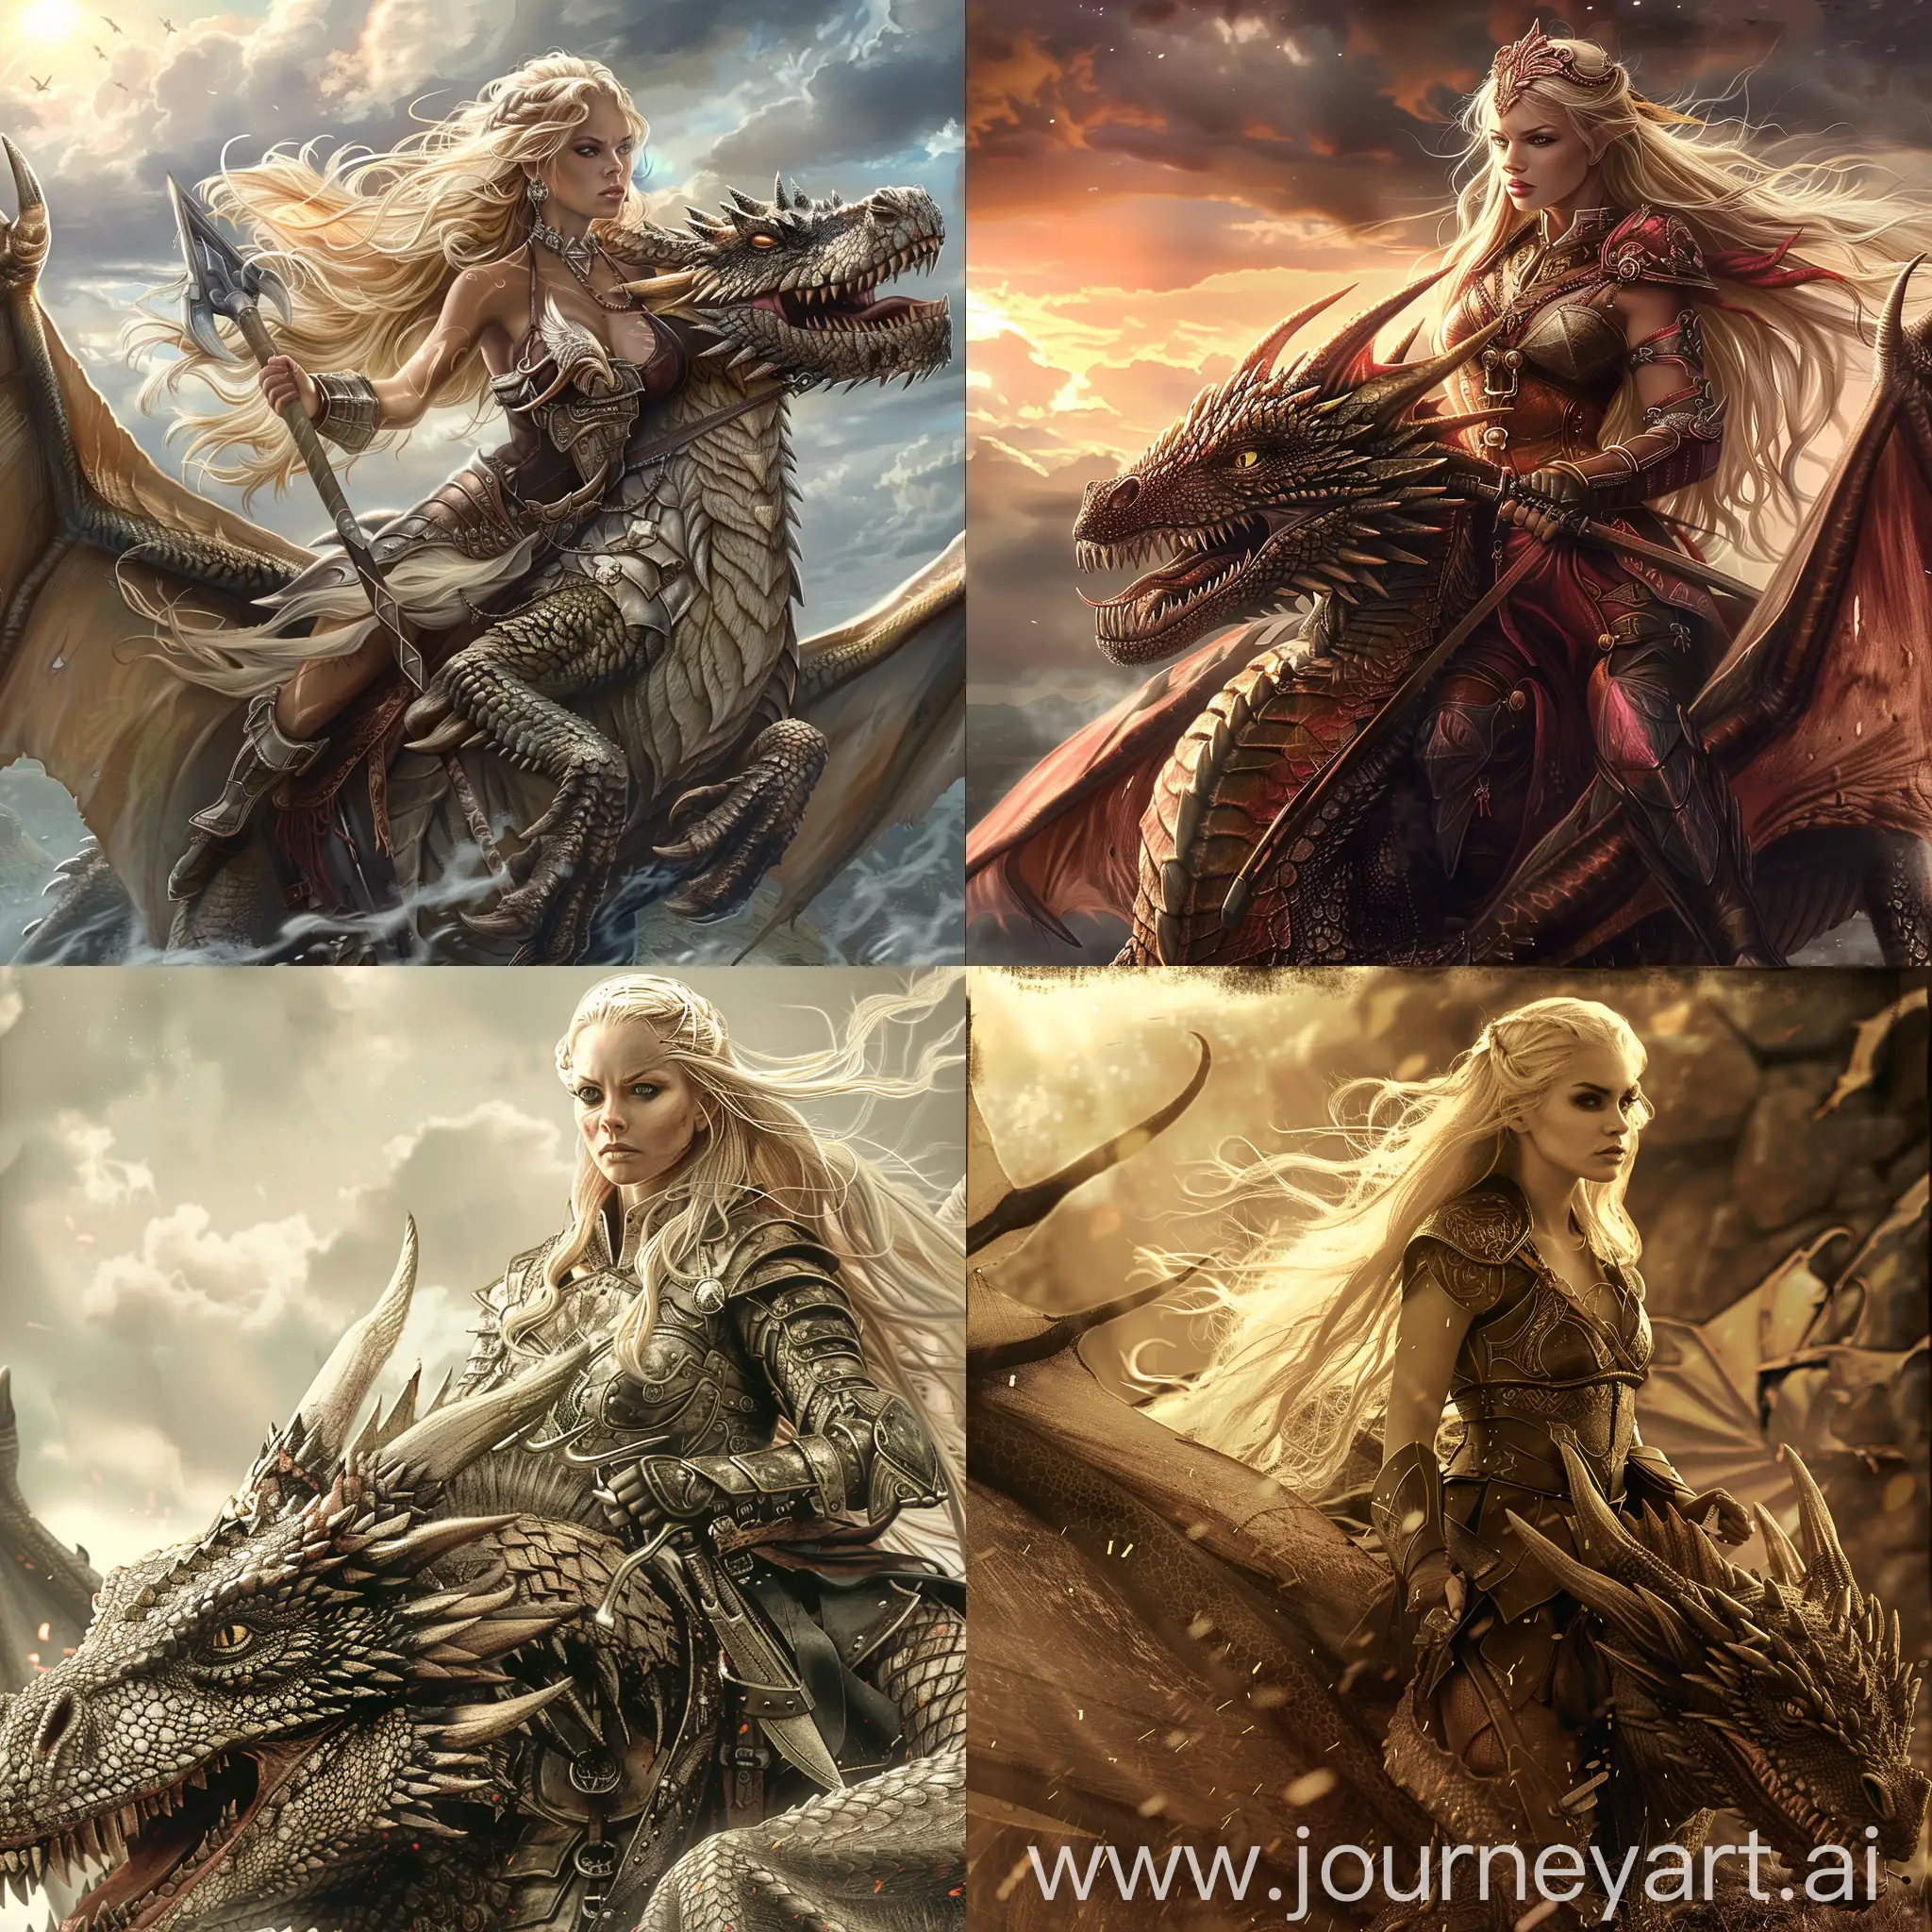 Beautiful Warrior maiden with long blonde hair riding a dragon. photographic